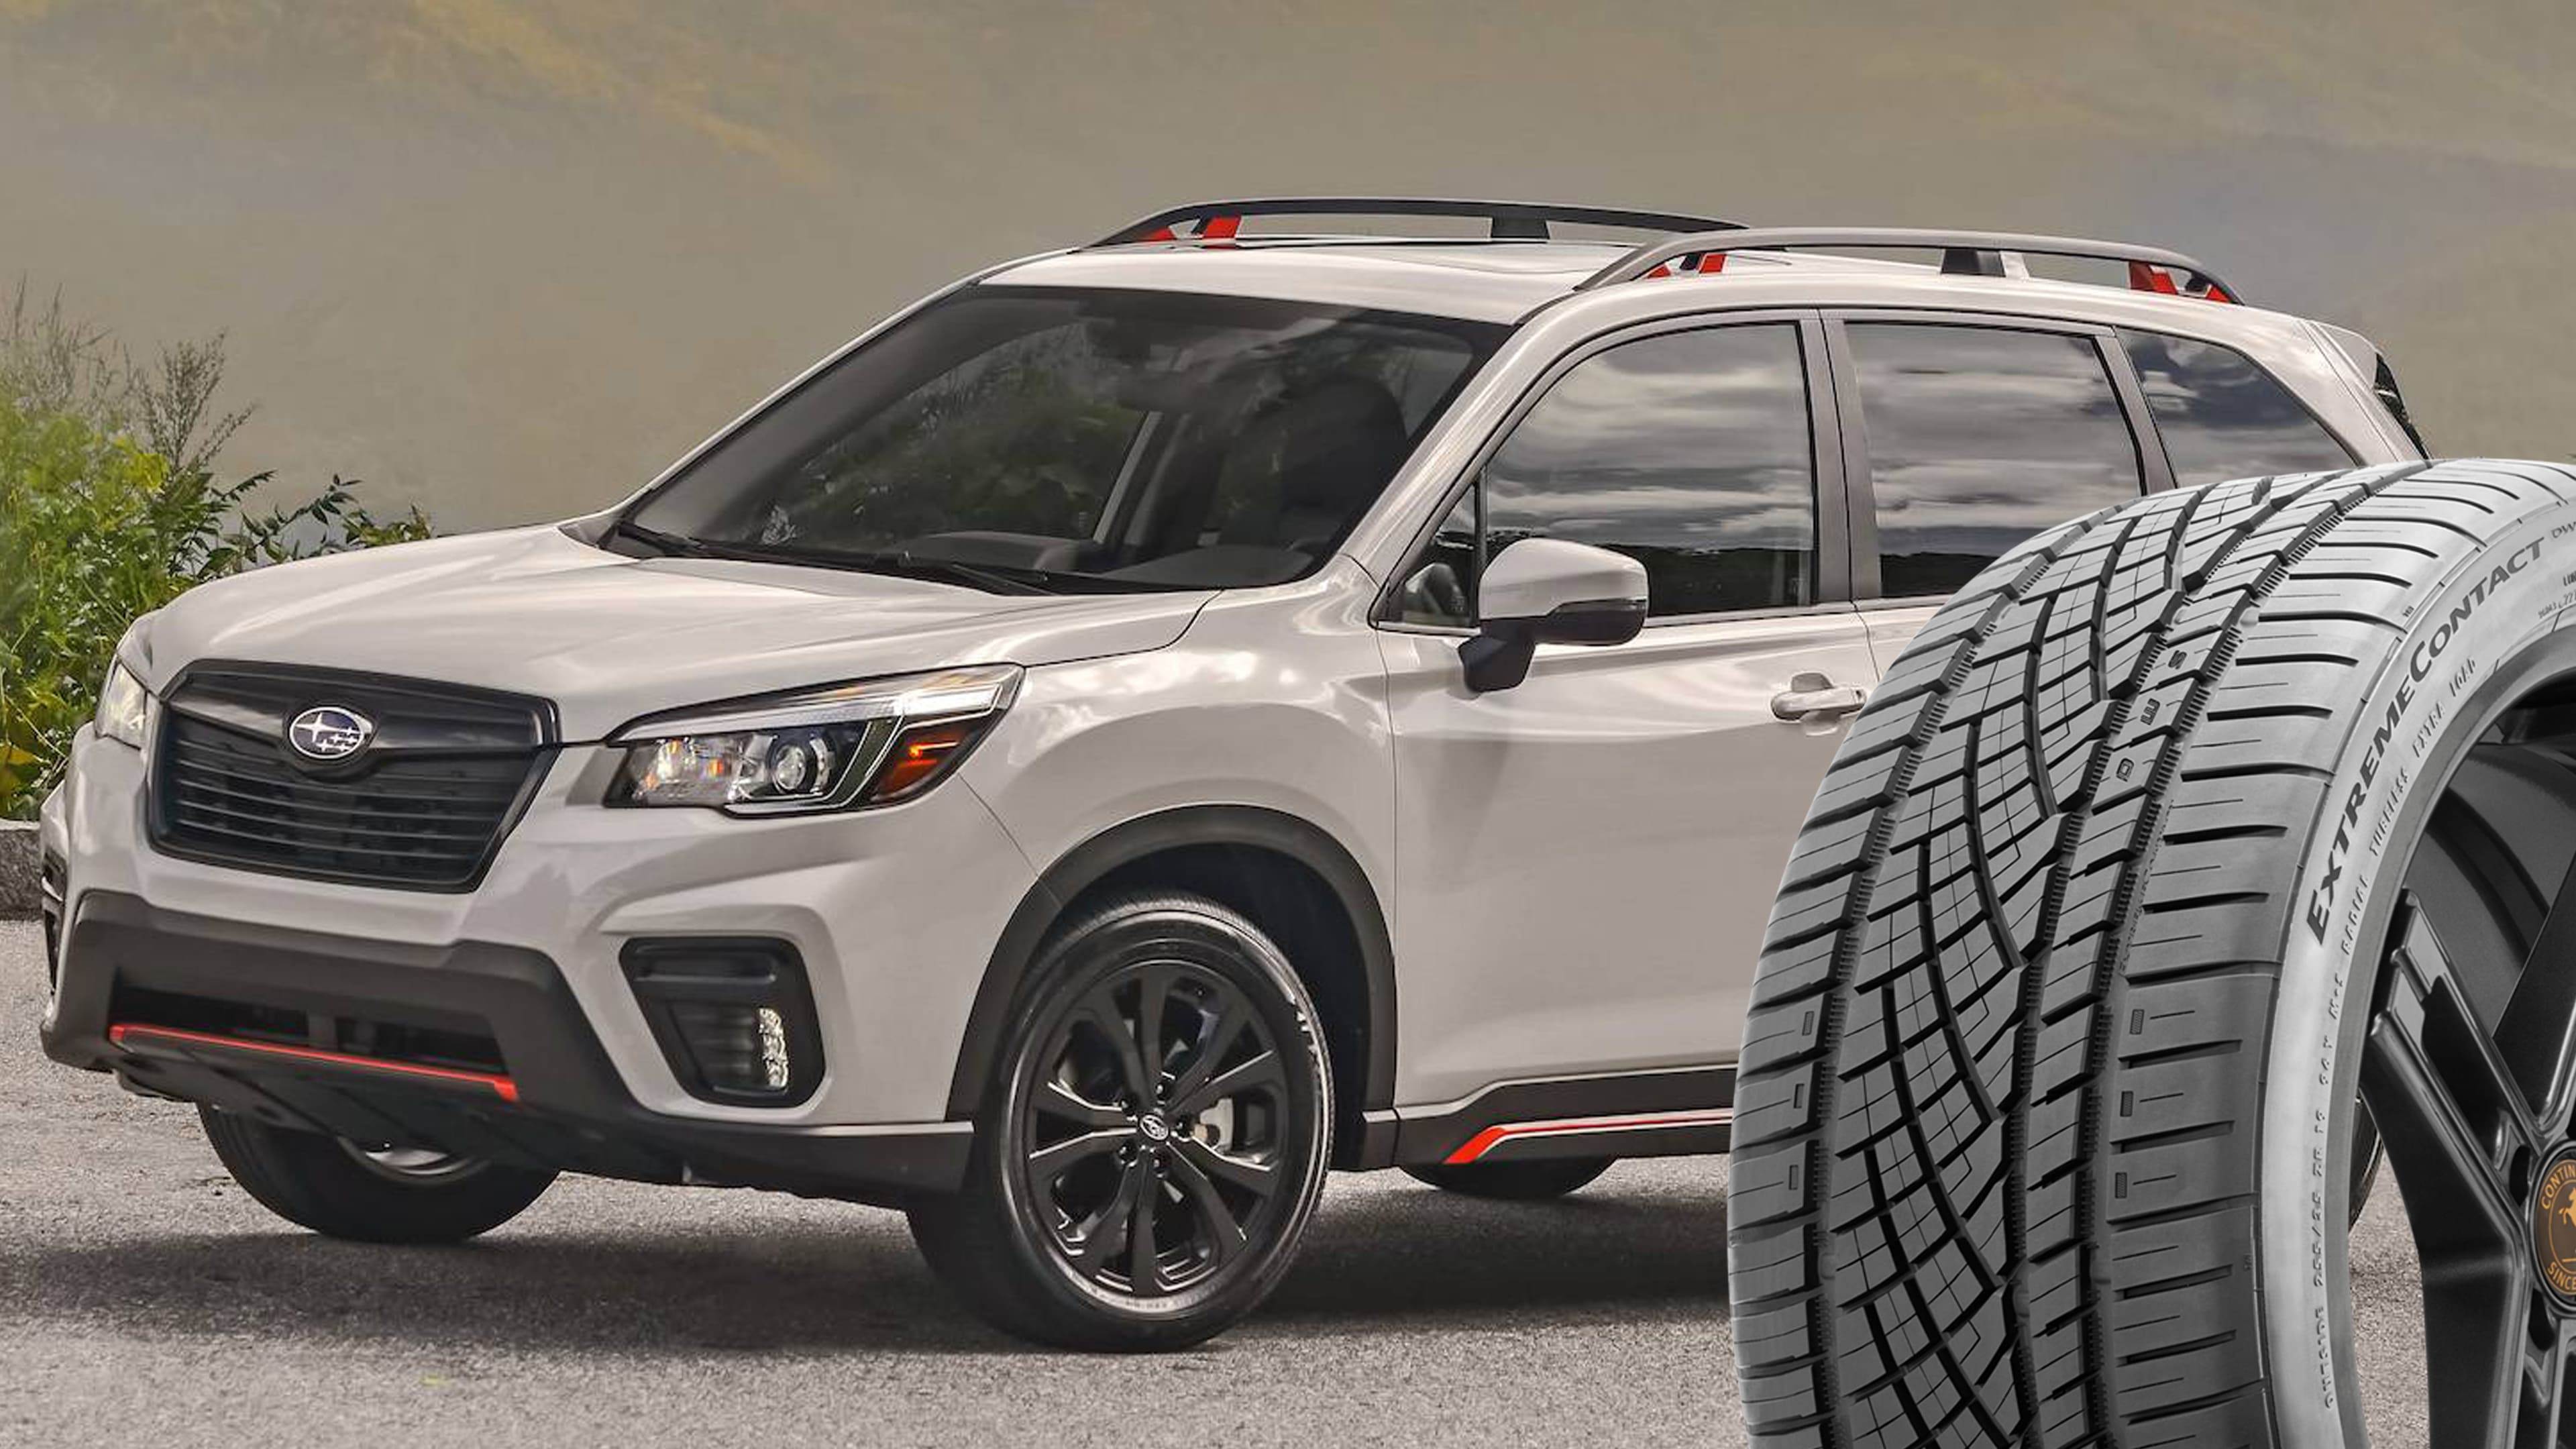 10 Great Subaru Forester Tires - Tire Space - tires reviews all brands